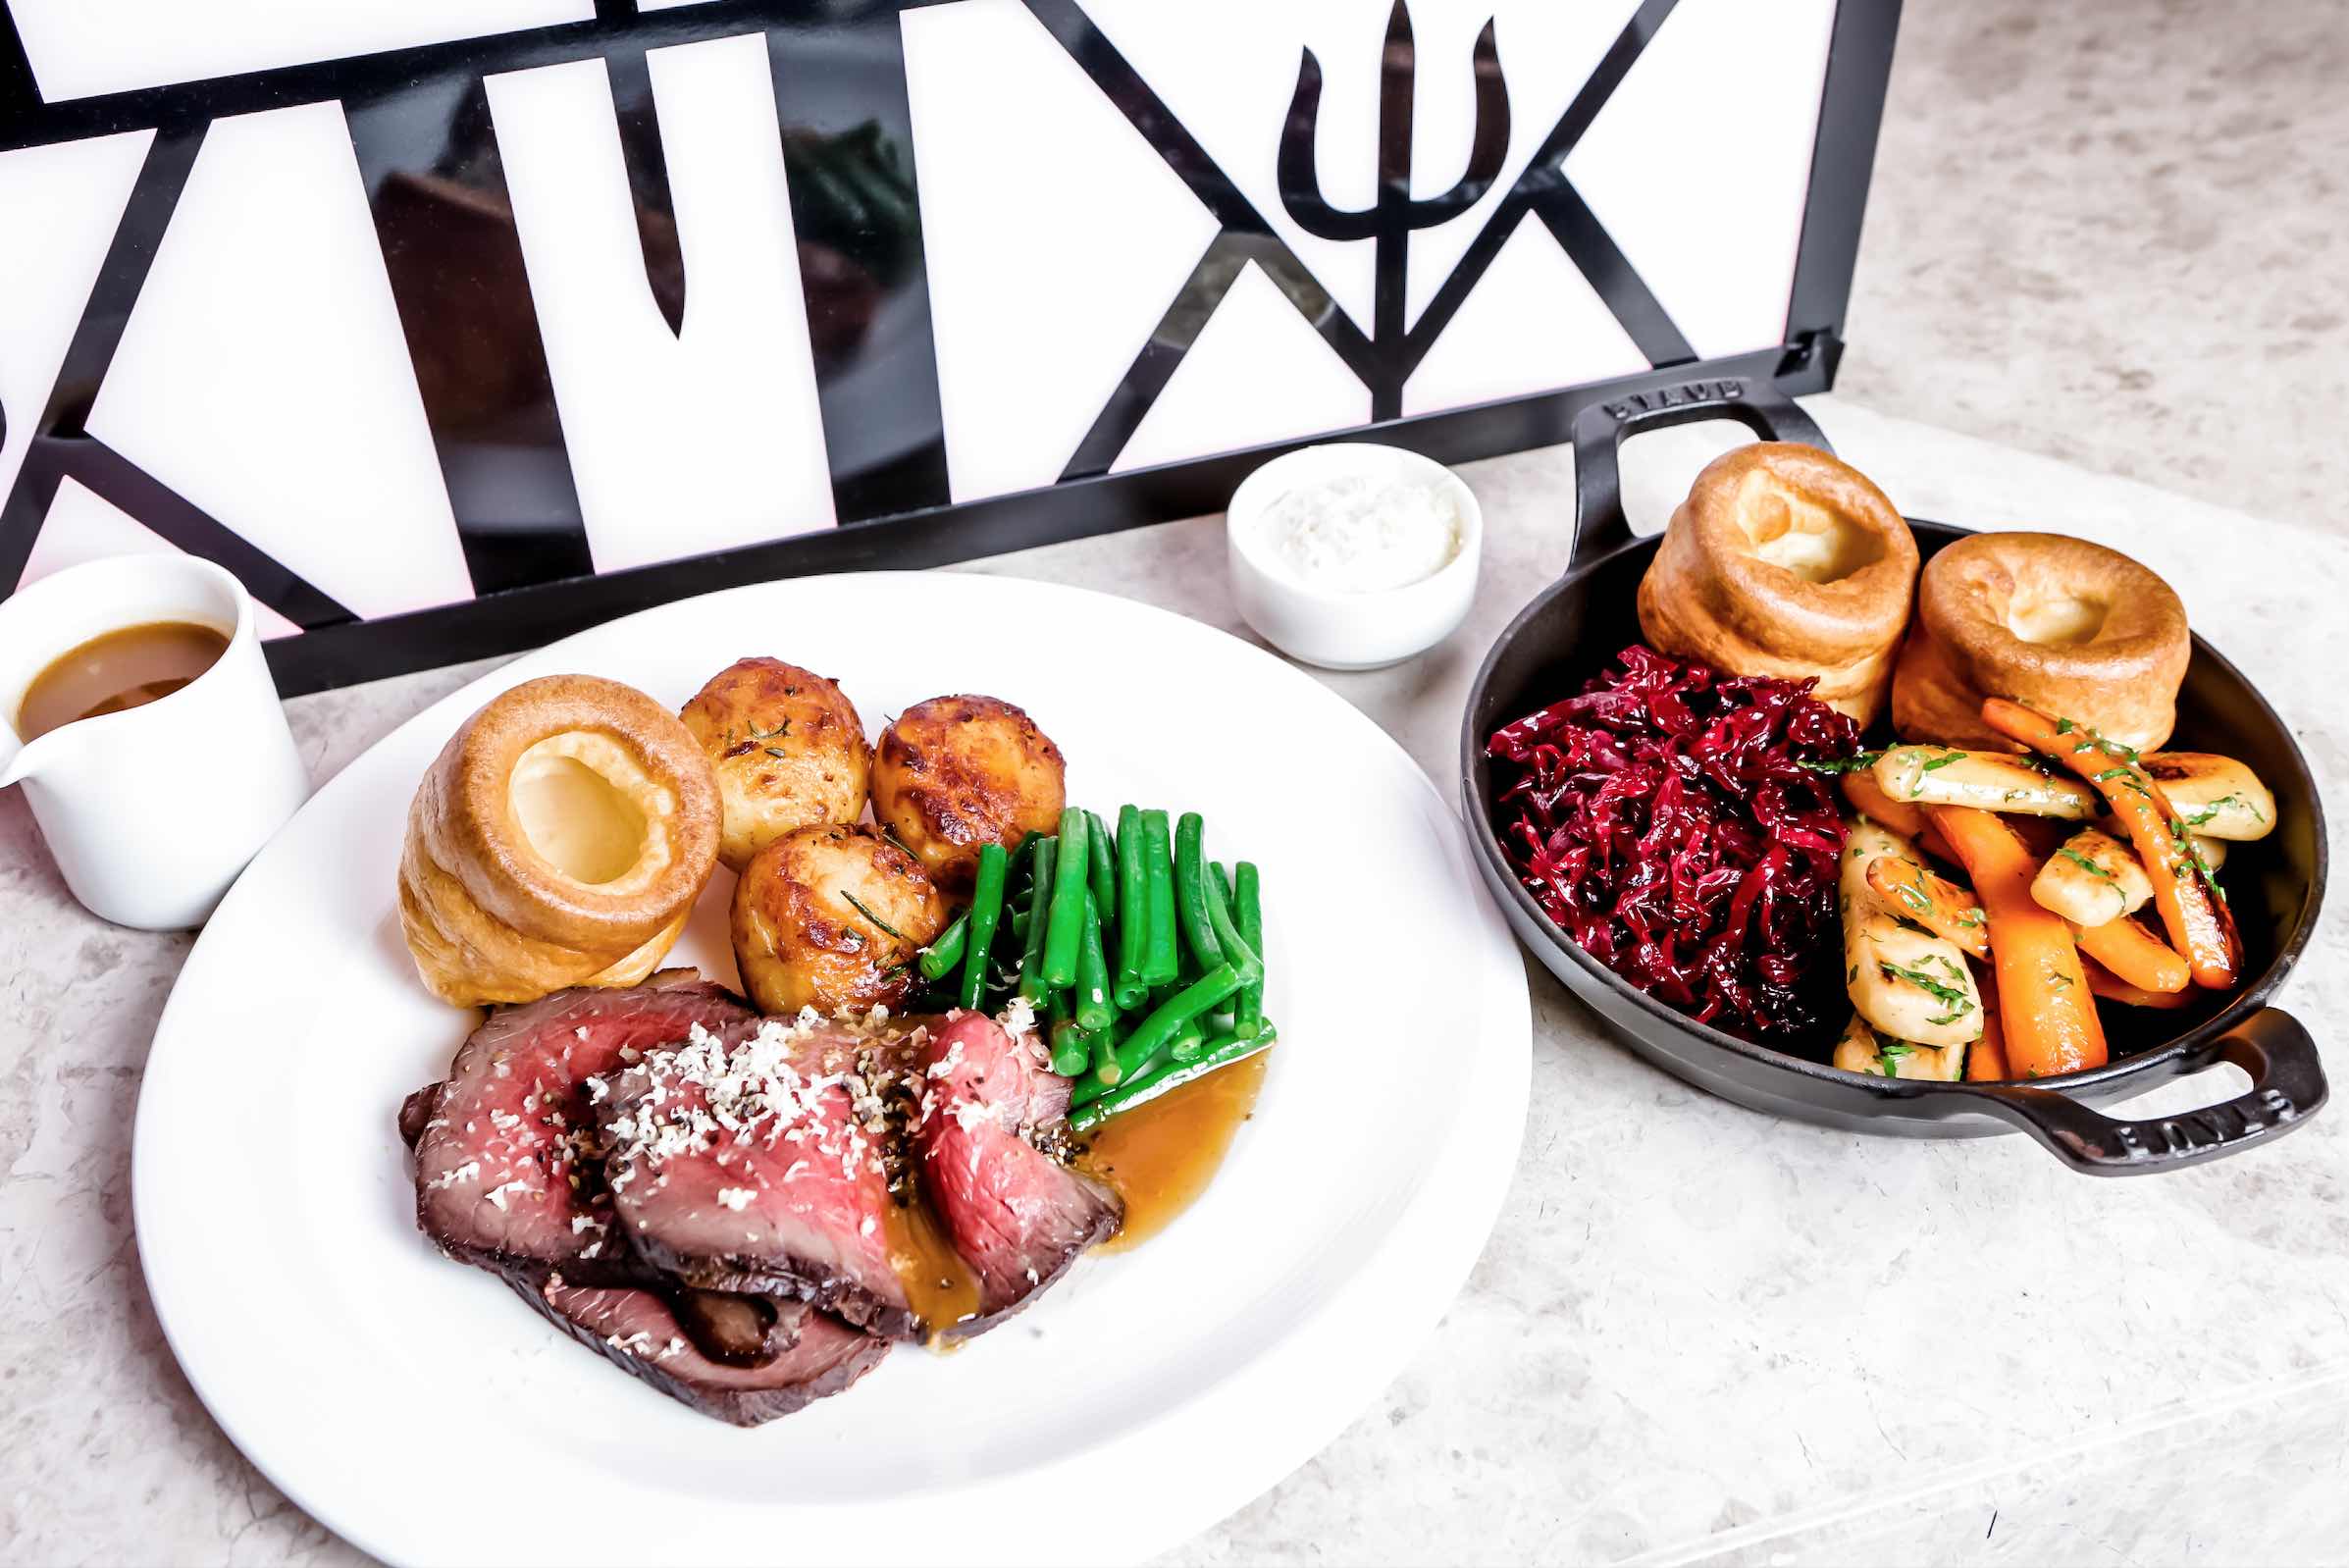 Boxing Day dining deals